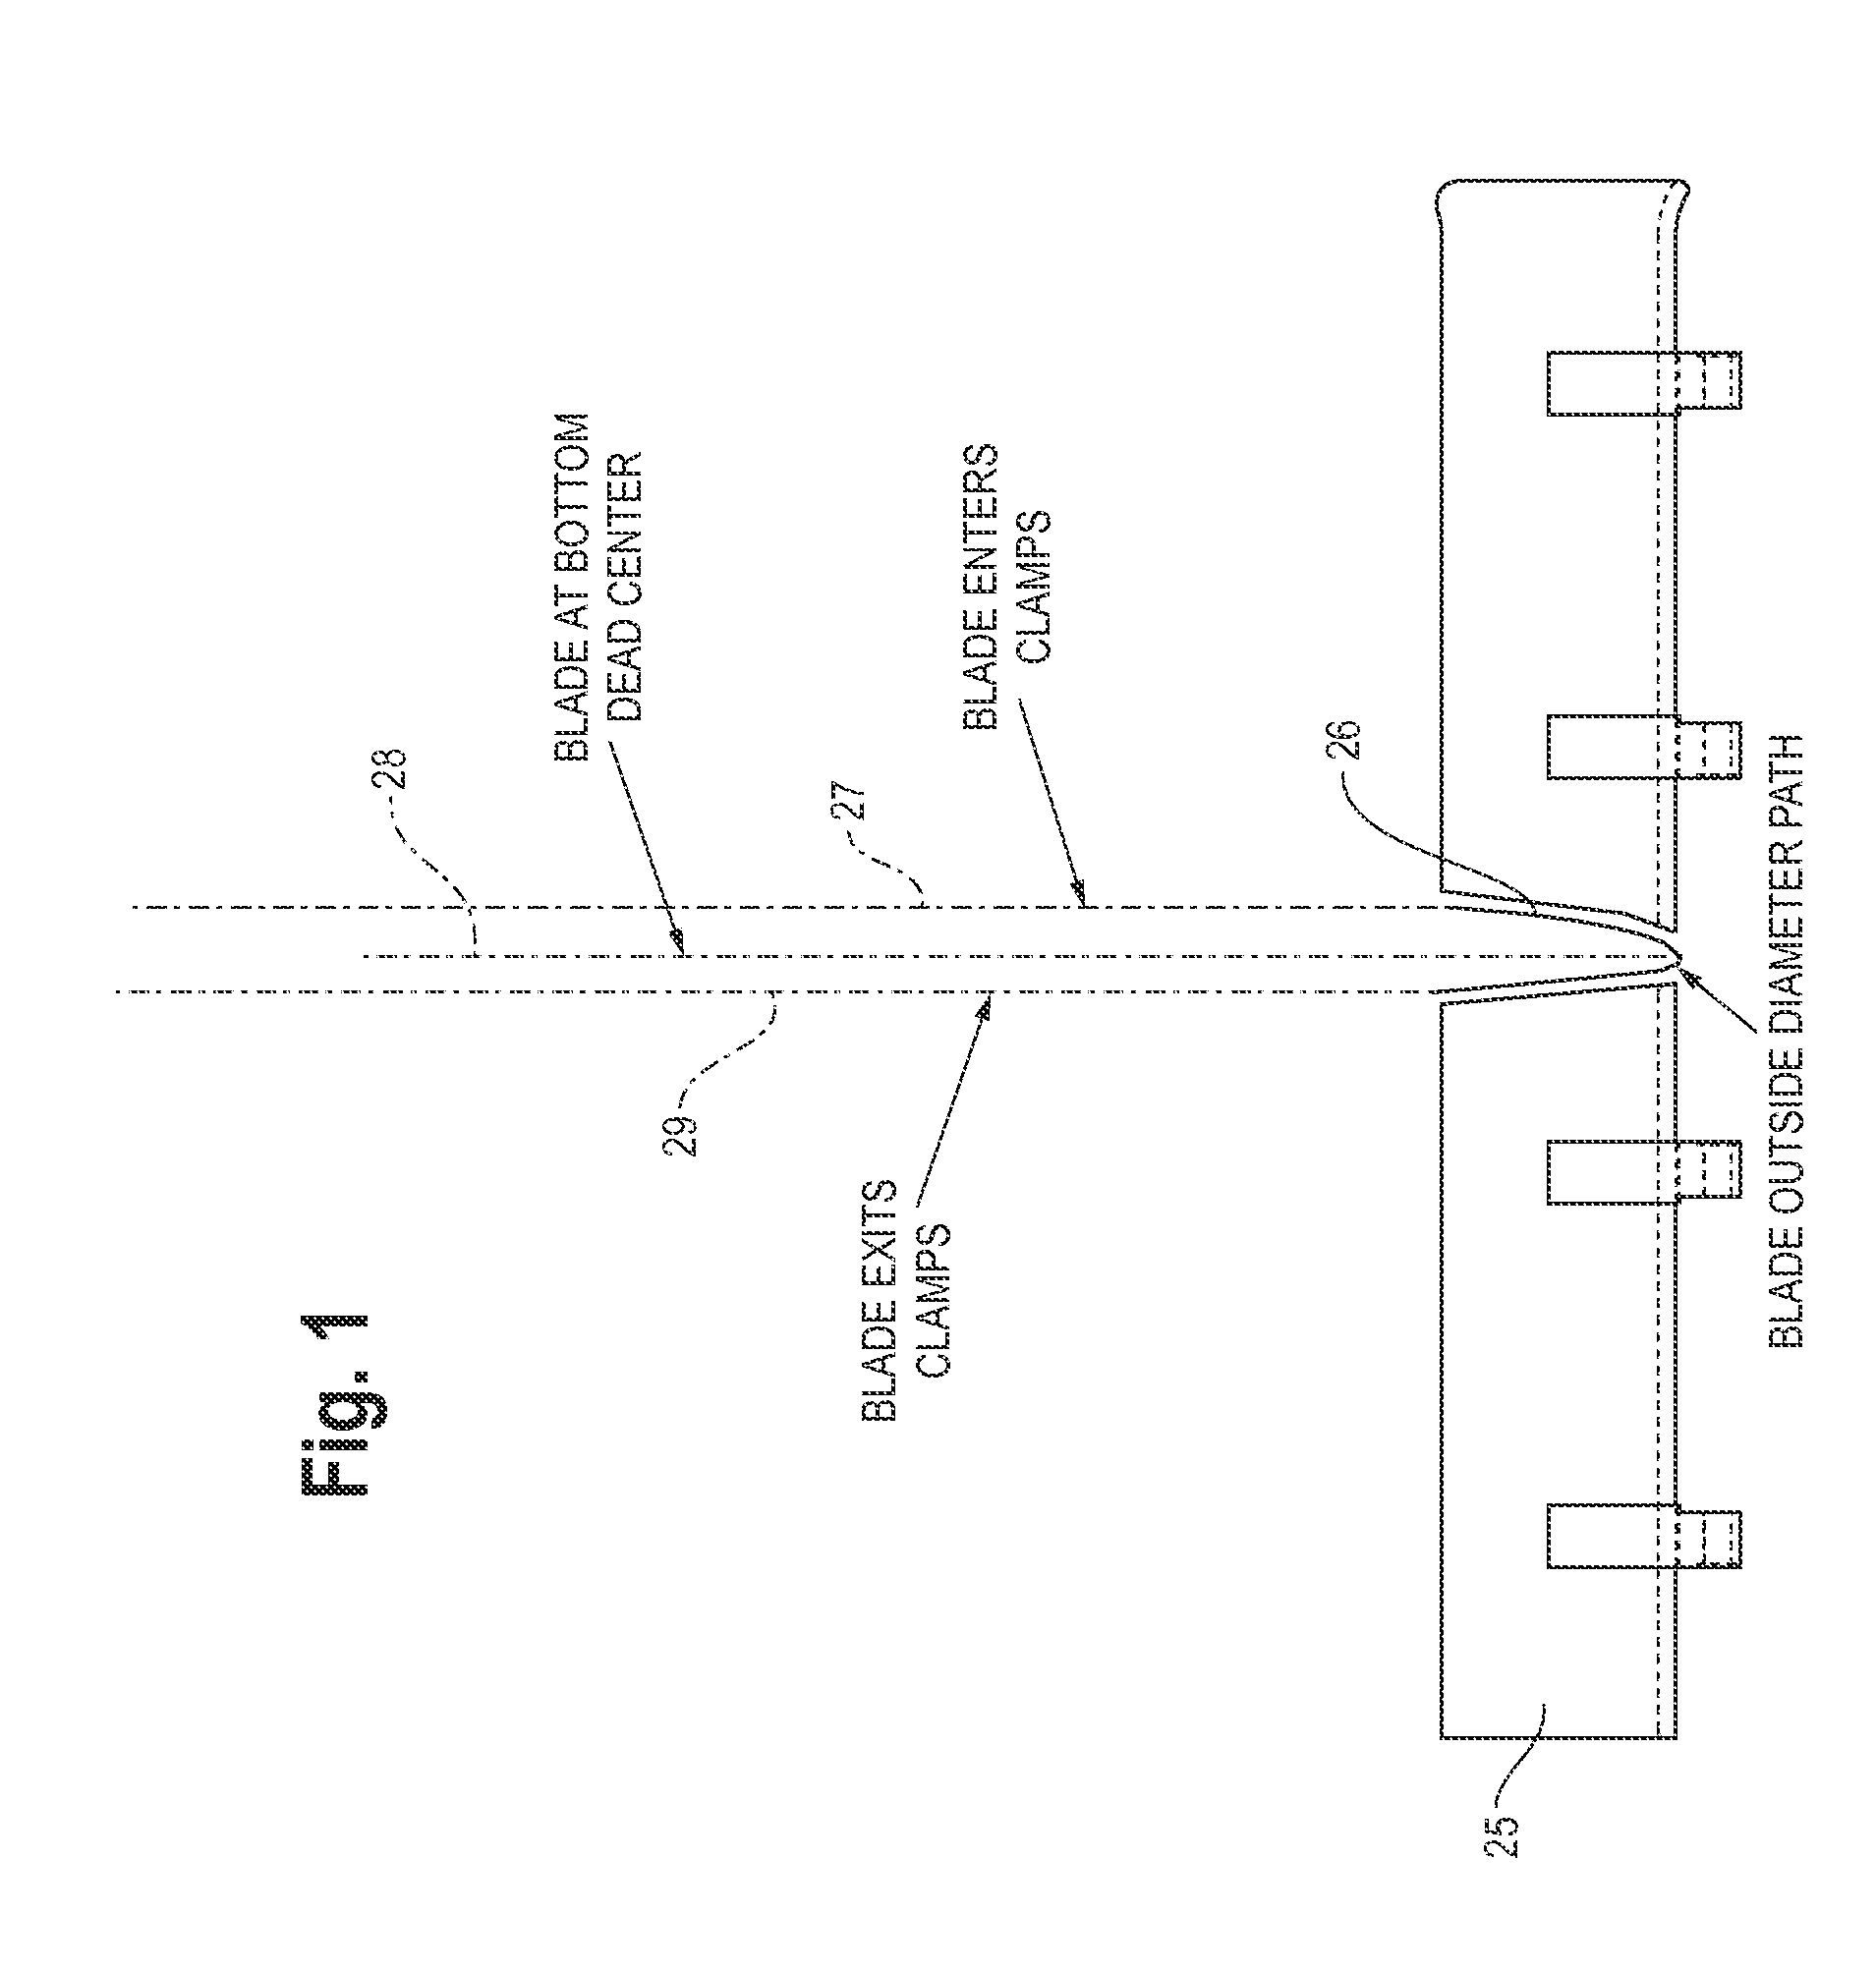 Method and apparatus for supporting product during cutting